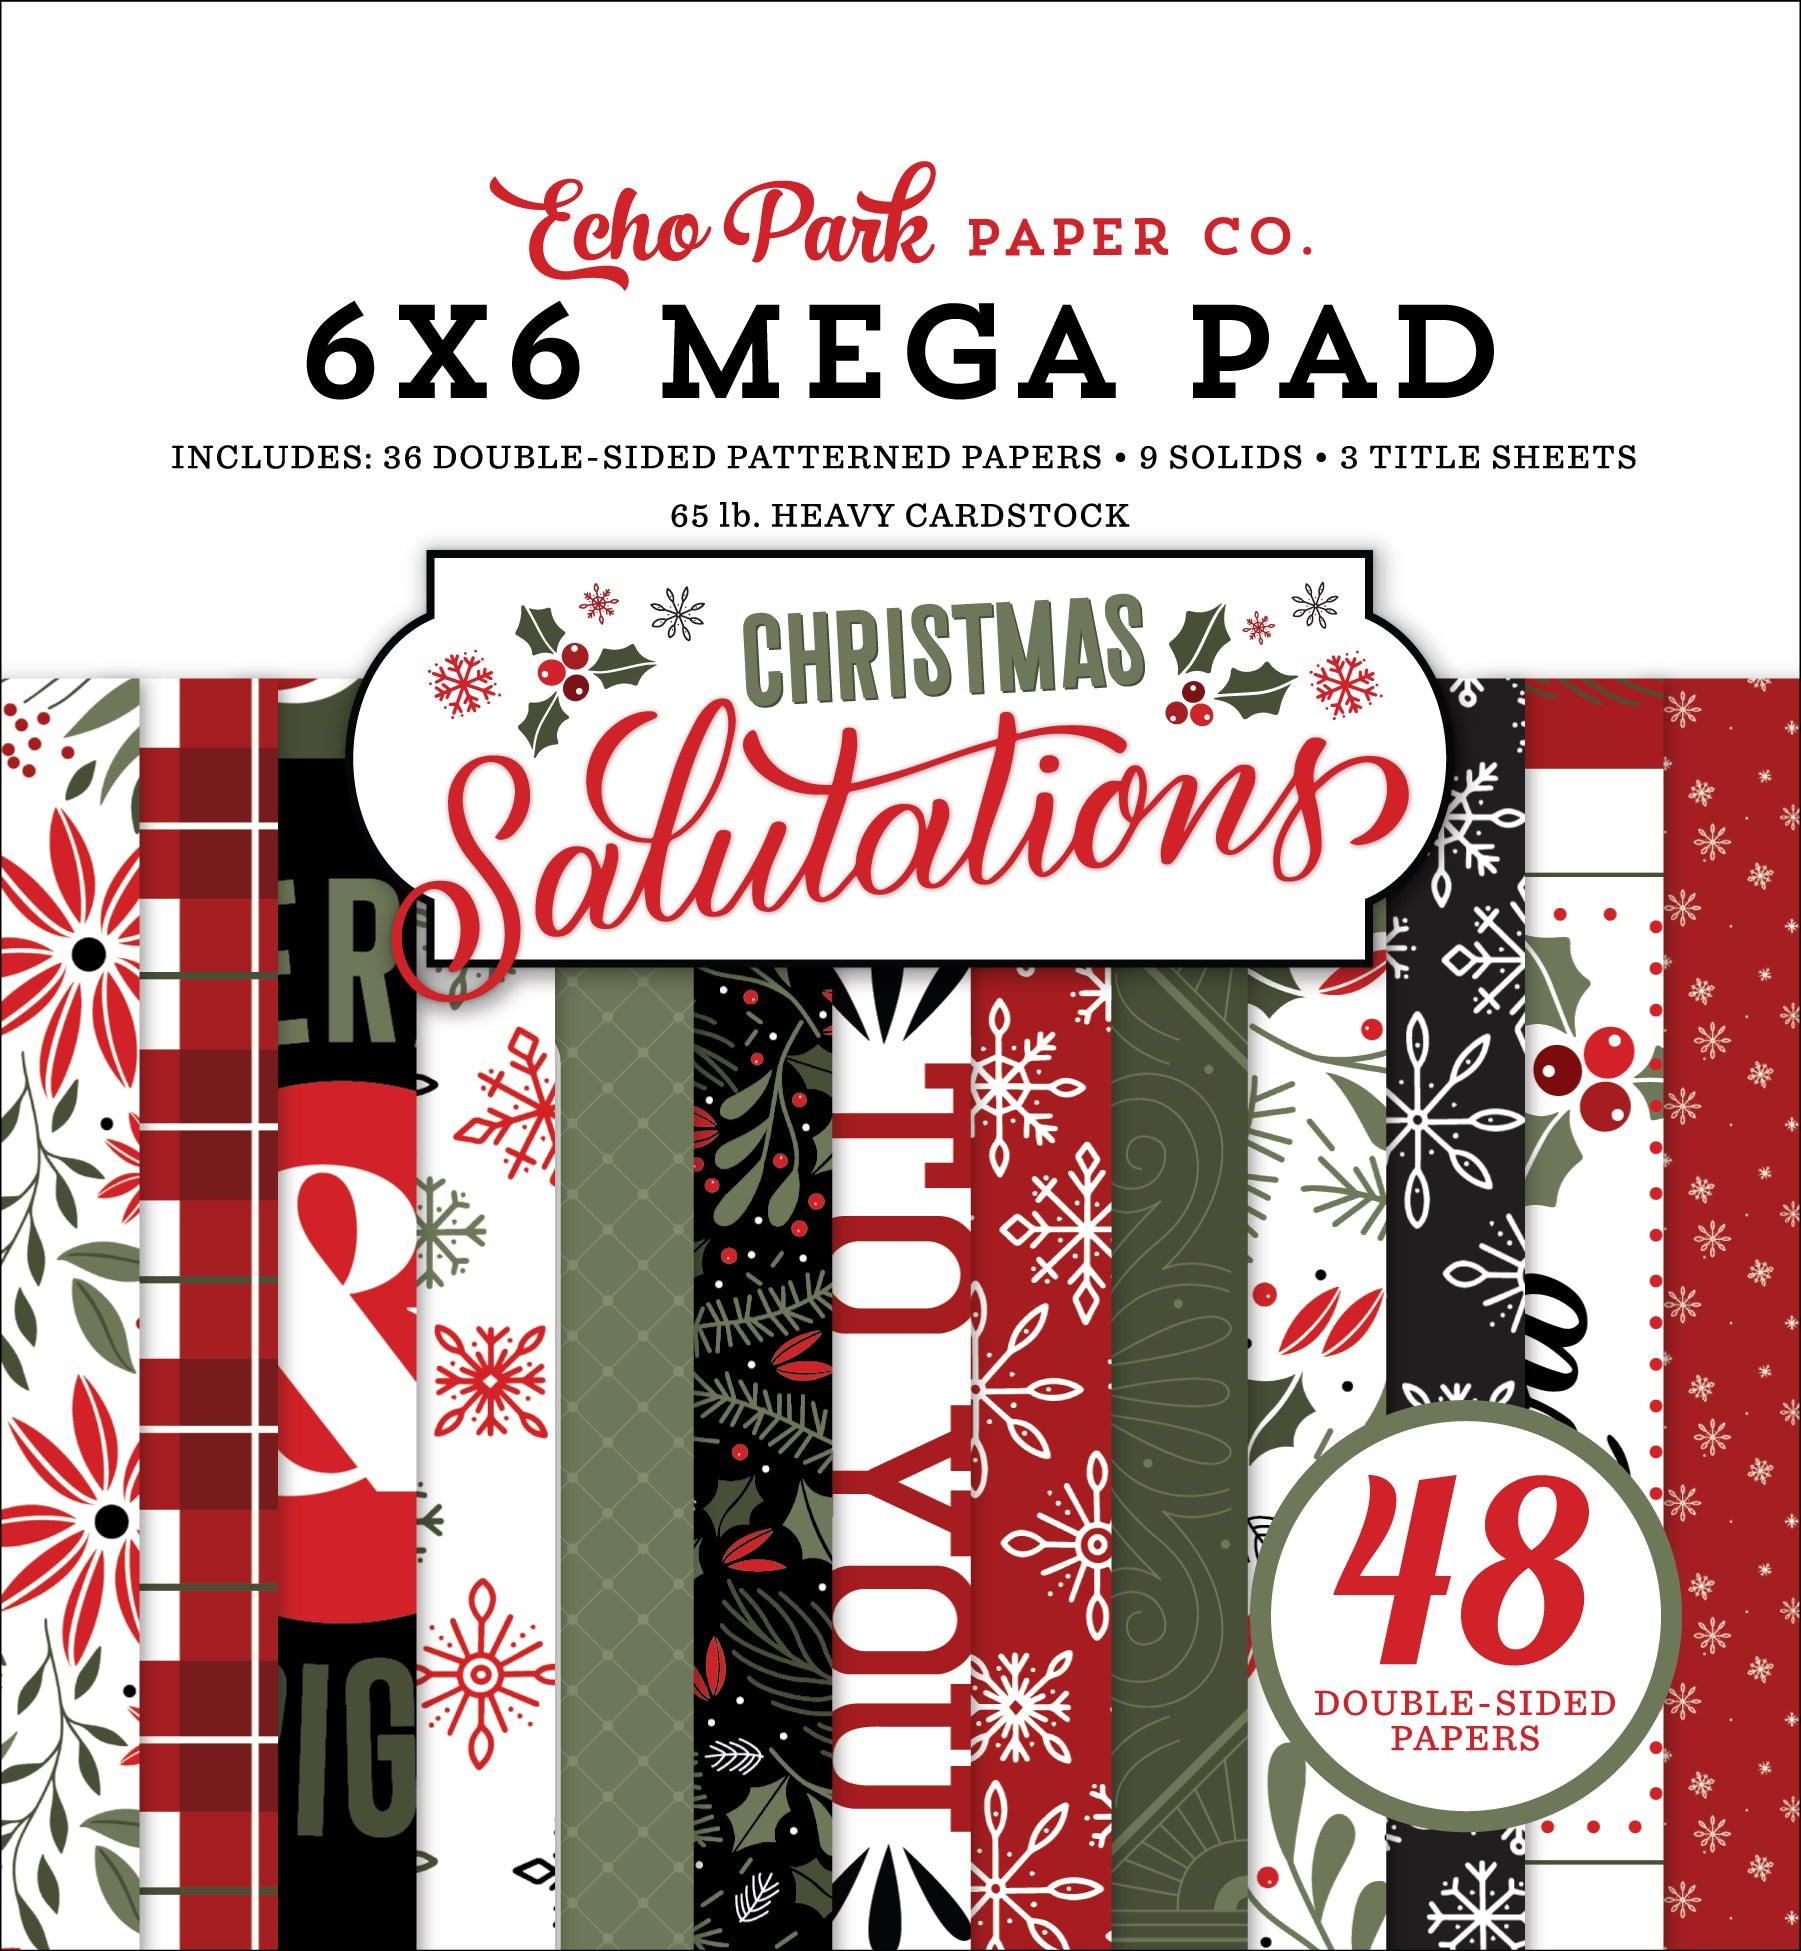 Christmas Salutations Collection 6 x 6 Mega Paper Pad by Echo Park Paper - 48 Double-Sided Papers - Scrapbook Supply Companies